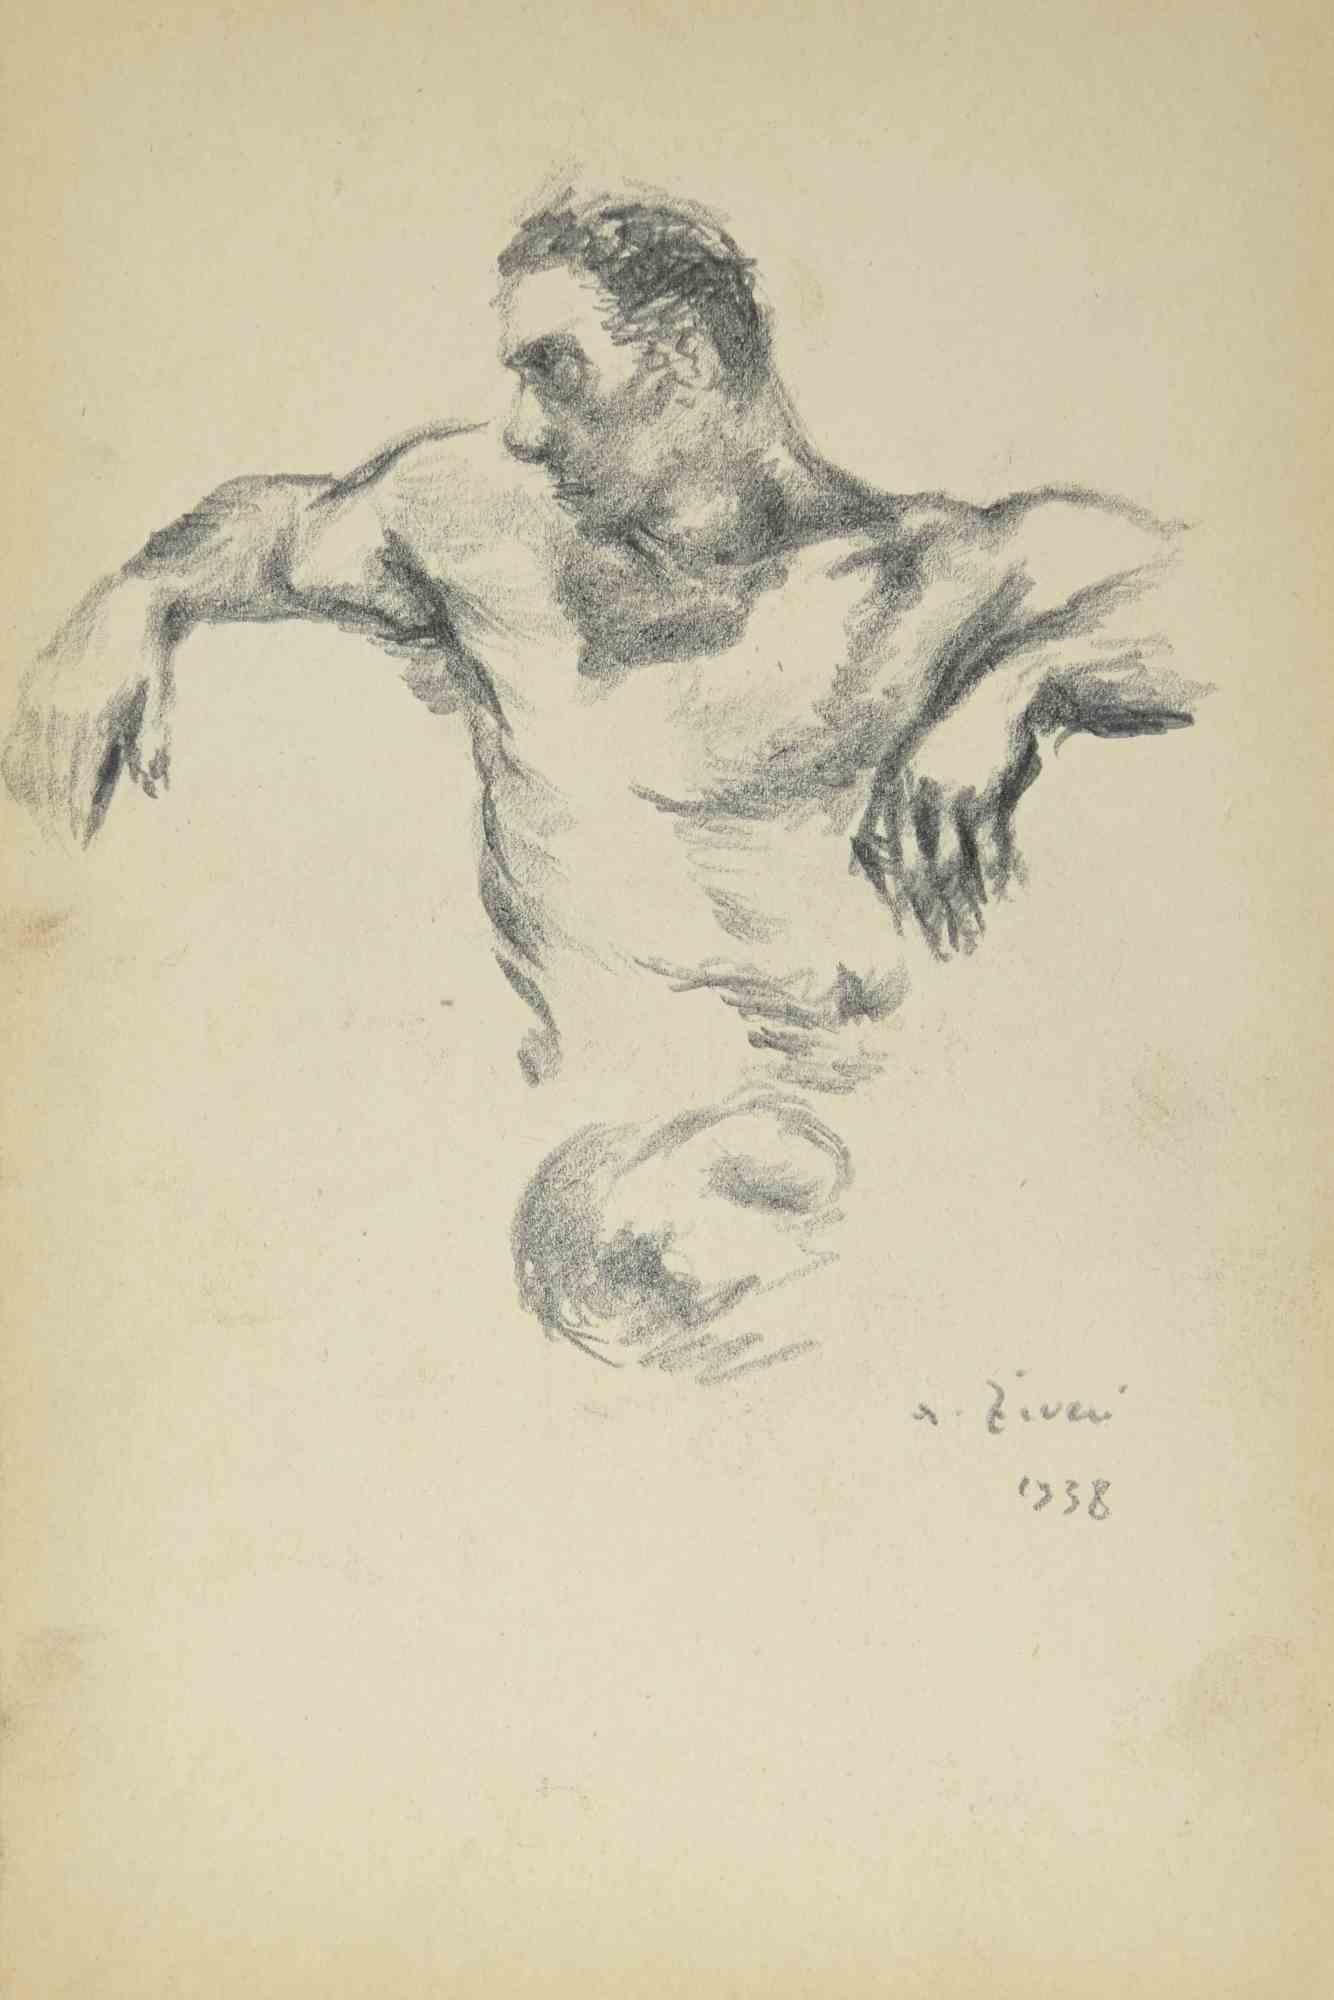 Male Nude is a drawing realized by Alberto Ziveri in 1938.

Charcoal on paper.

Hand-signed on the lower and dated.

In good conditions

The artwork is represented through deft strokes masterly.

Alberto Ziveri (Rome,1908 – 1990), the Italian